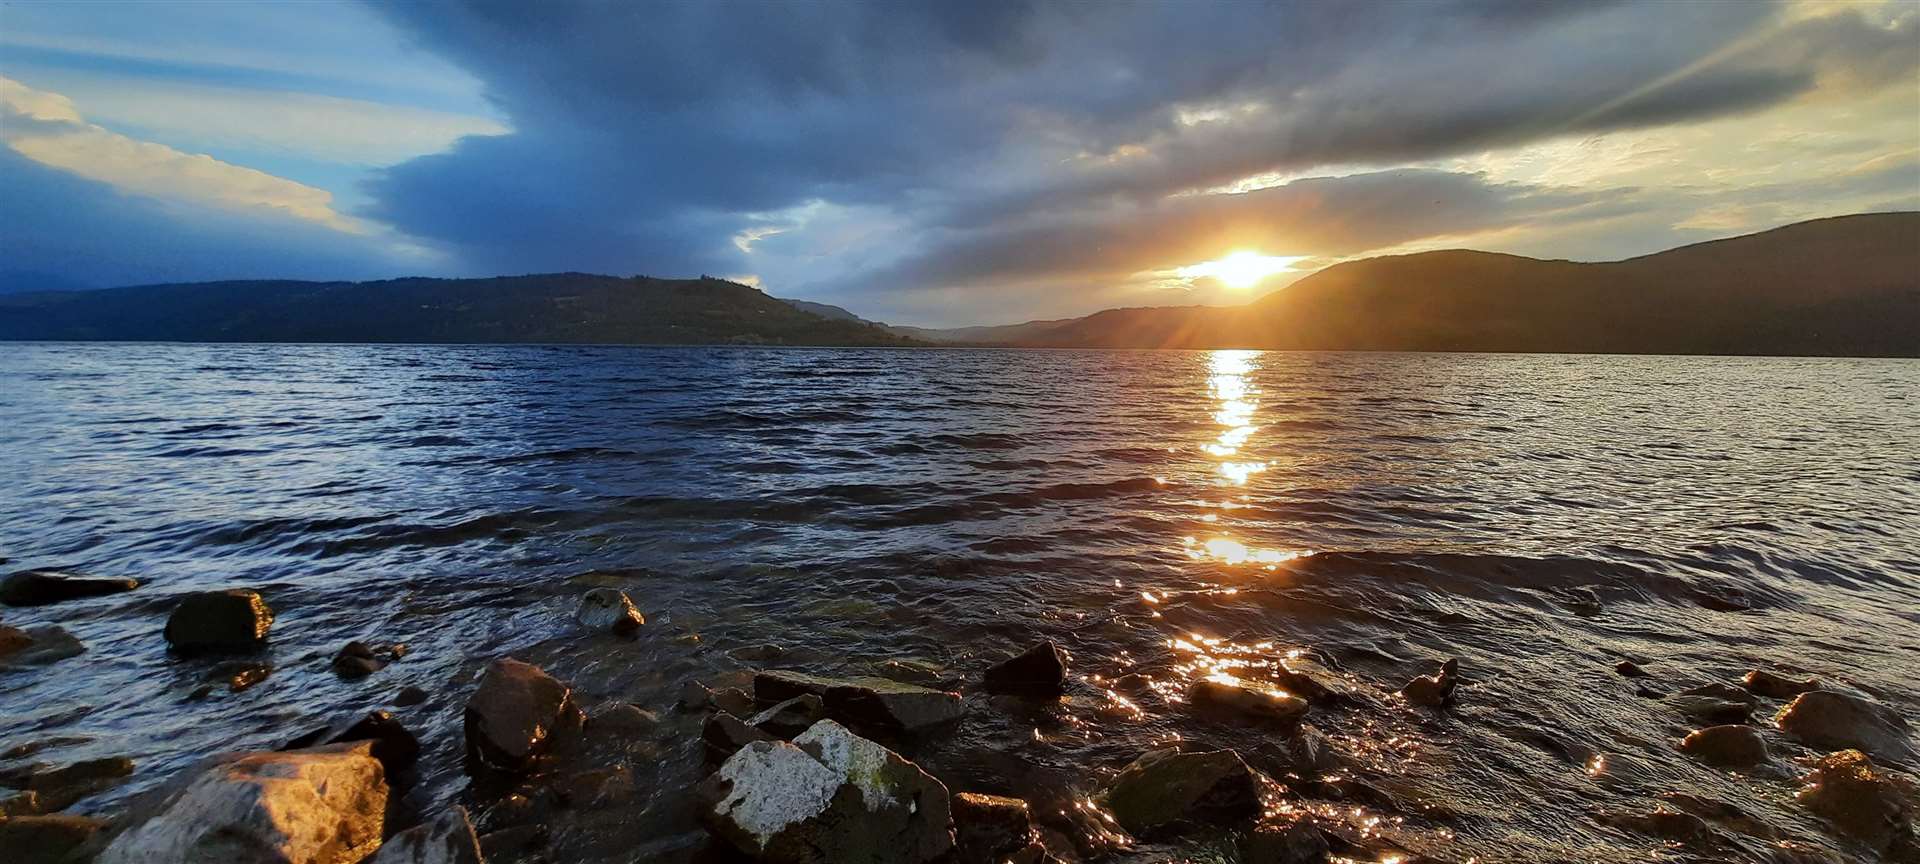 Returning to a glorious sunset over Loch Ness.